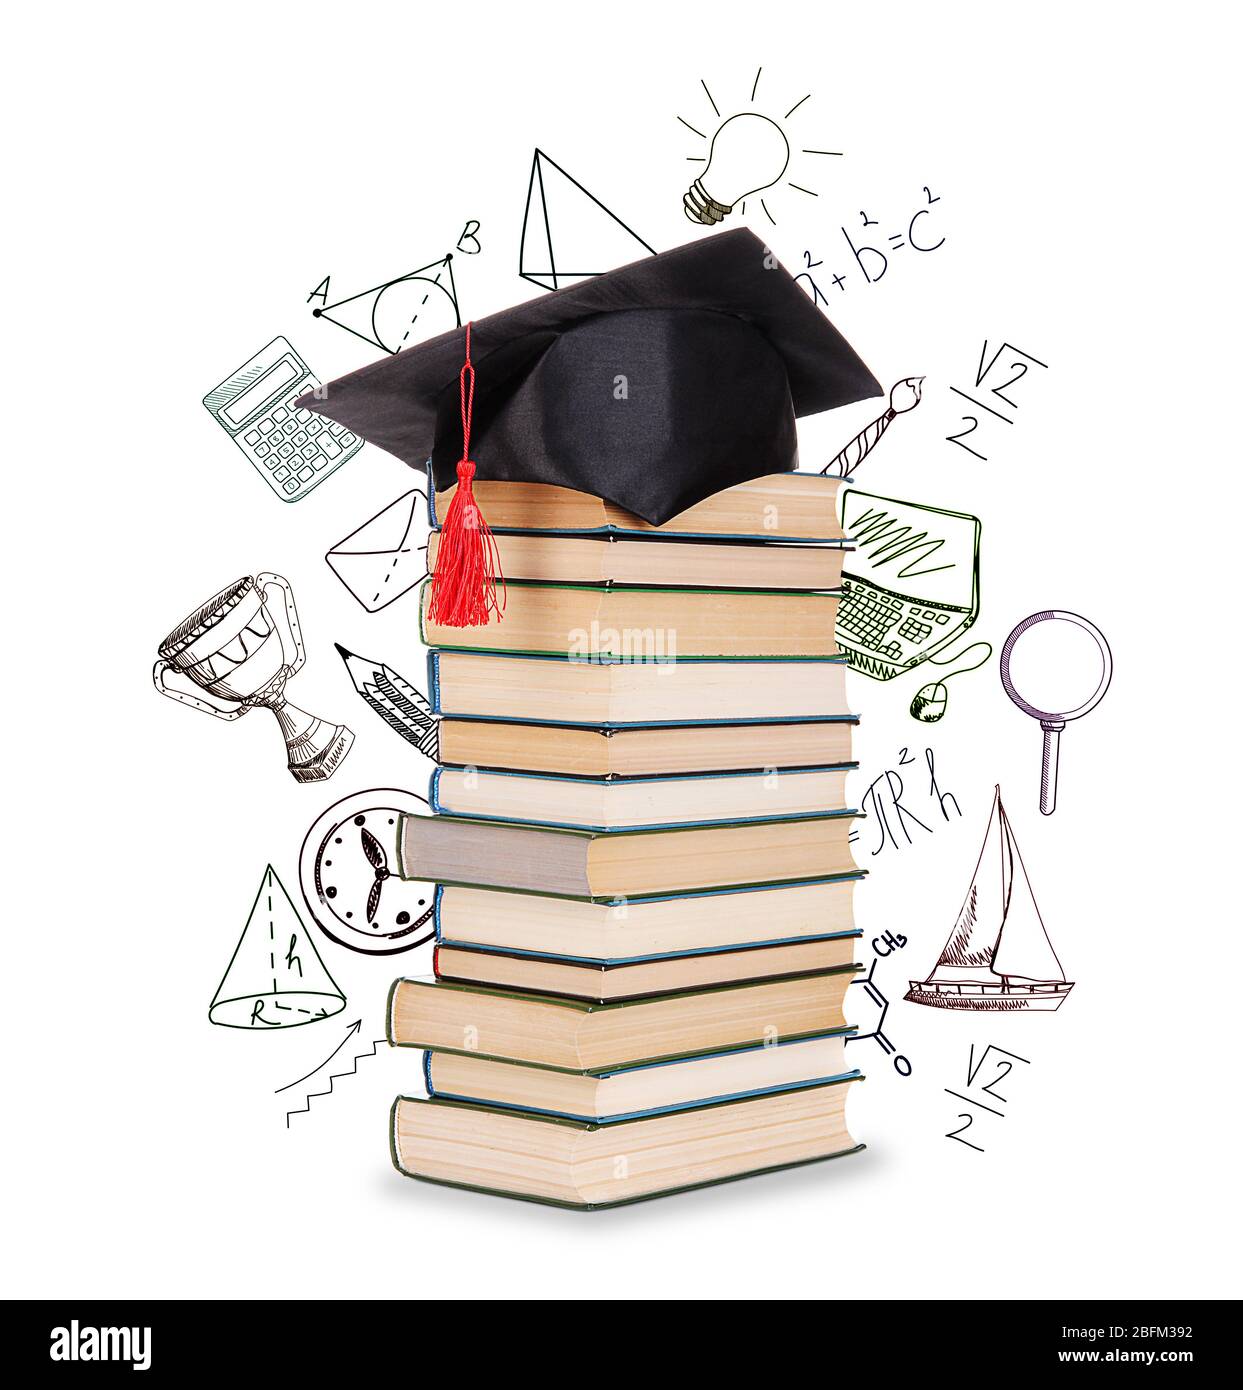 Pile of books with grad hat and vector images, isolated on white Stock Photo